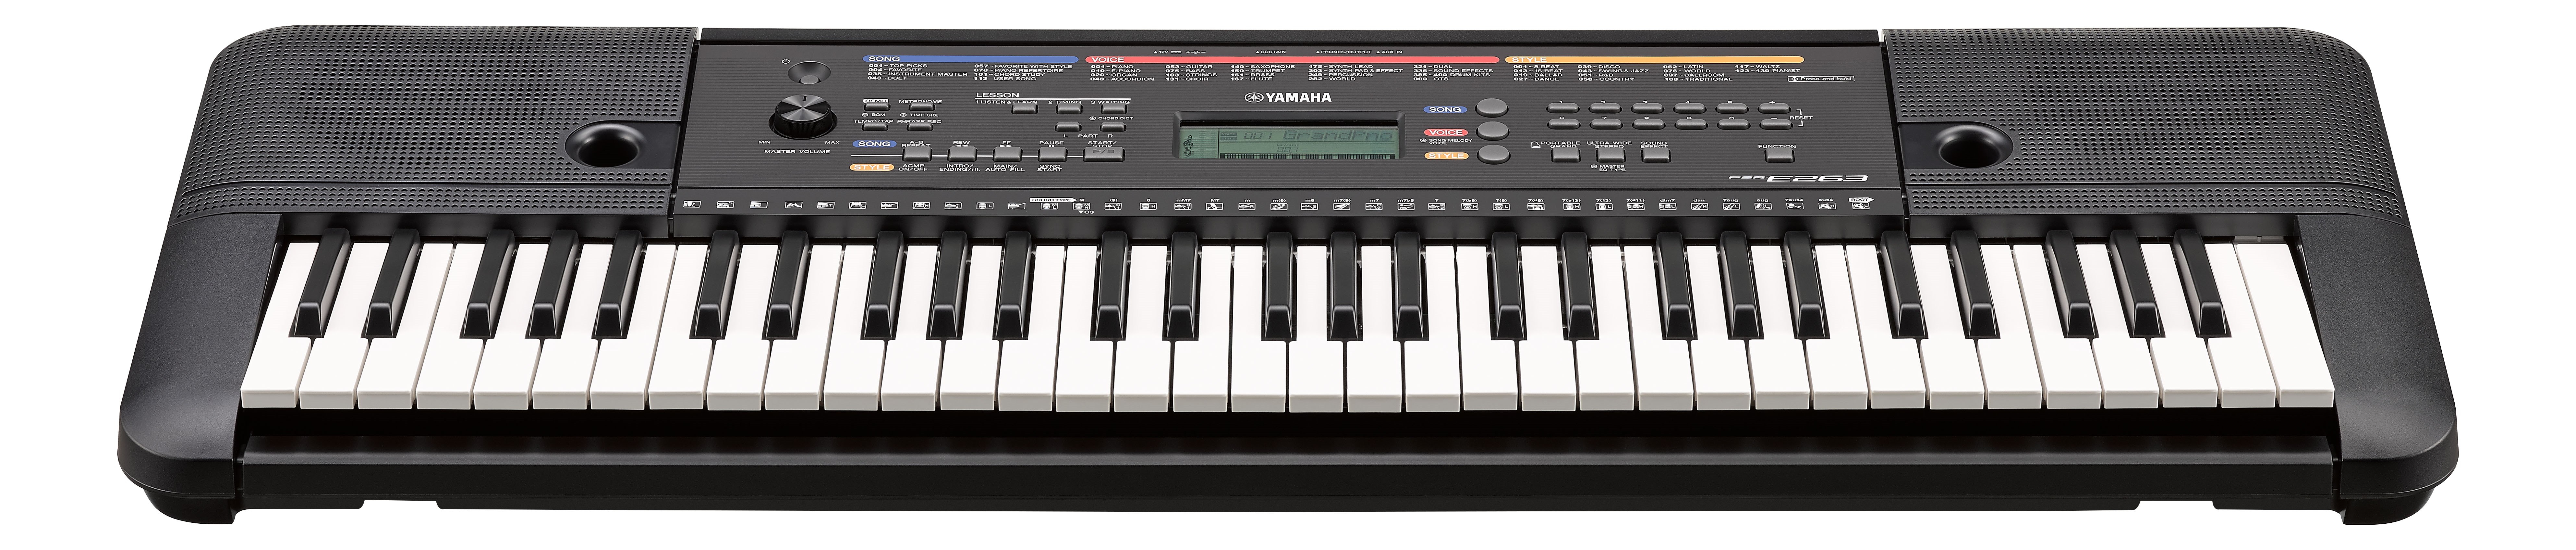 Normalmente blanco como la nieve Comprometido PSR-E263 - Overview - Portable Keyboards - Keyboard Instruments - Musical  Instruments - Products - Yamaha USA